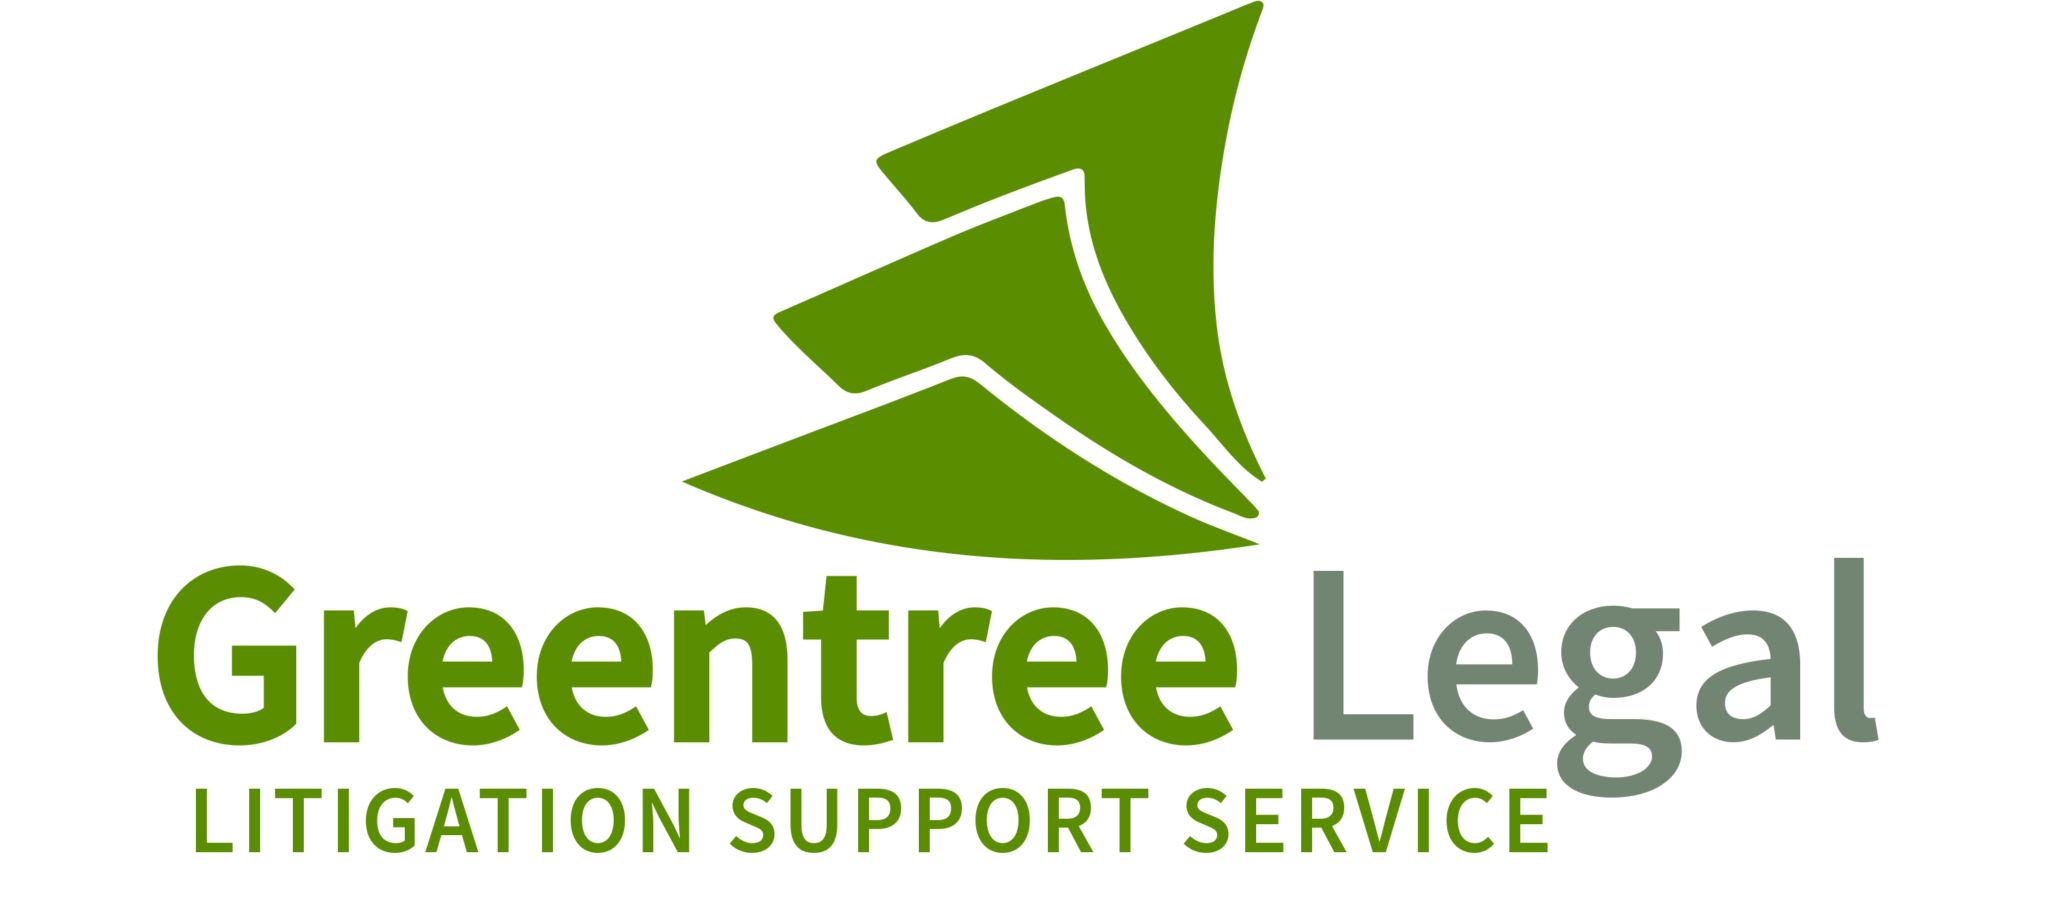 GREEN TREE LEGAL LOGO 1 - Process Service Order Placement